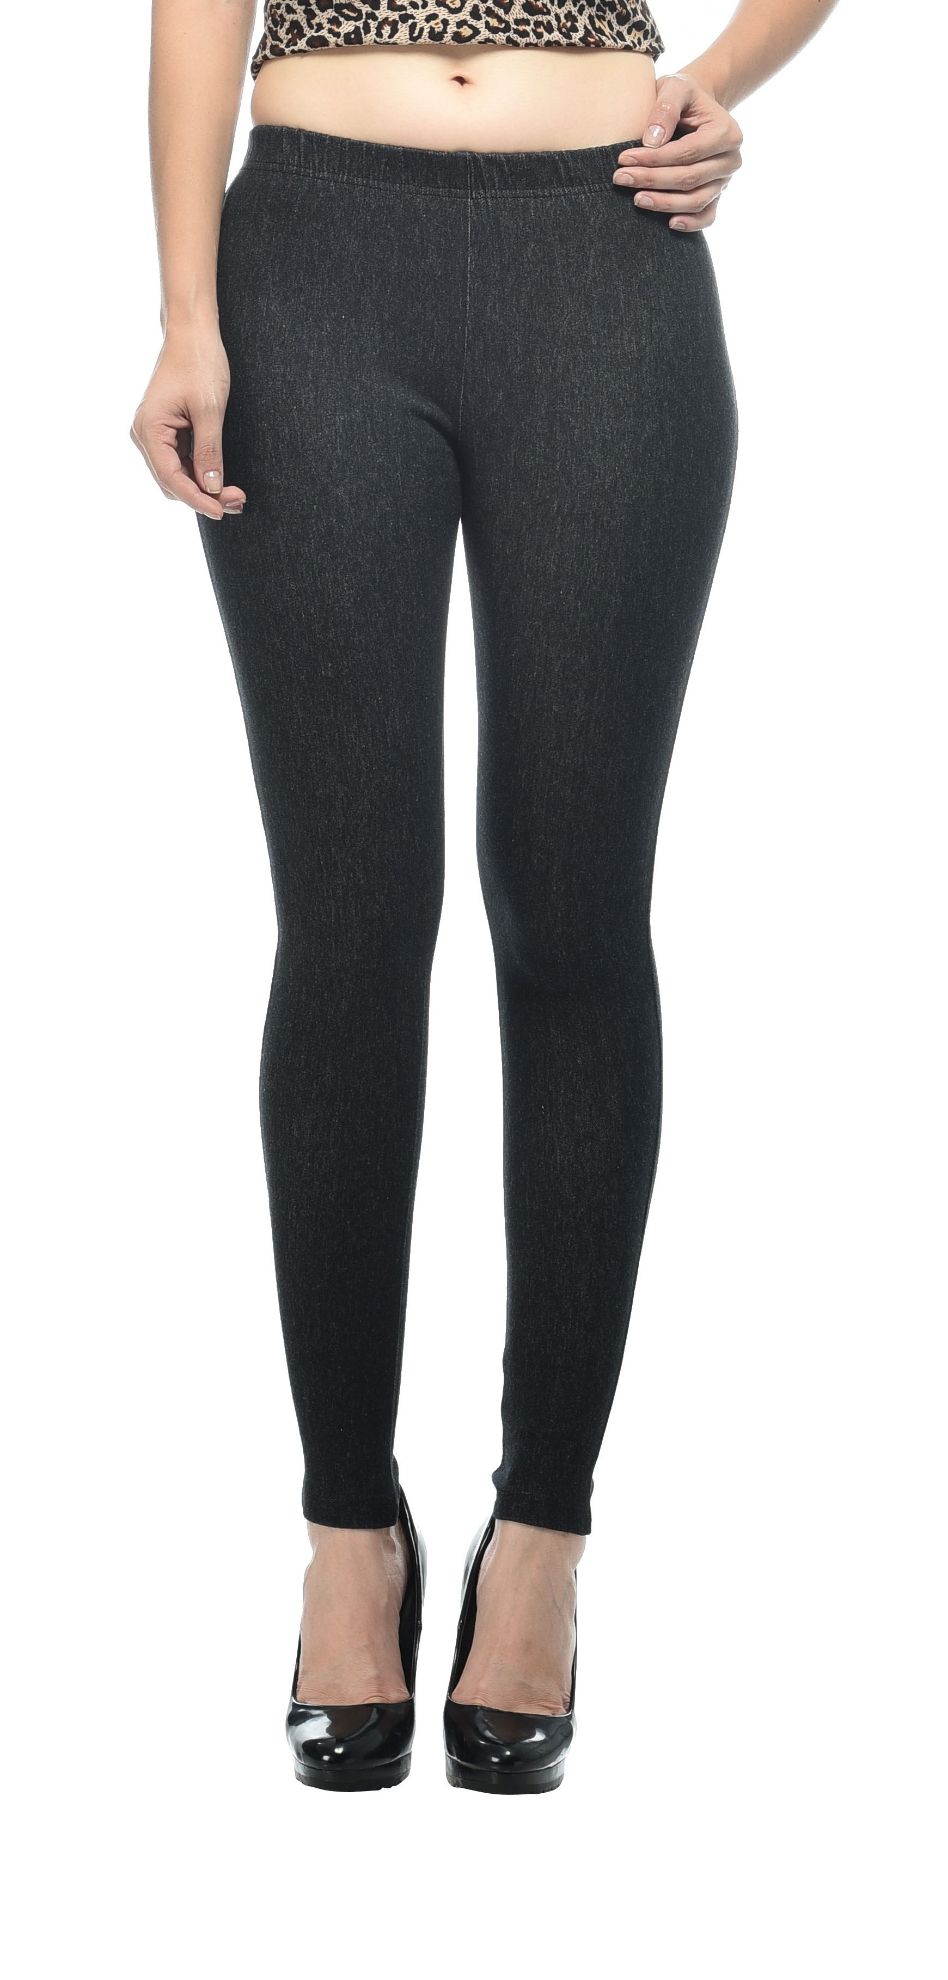 https://frenchtrendz.com/images/thumbs/0005369_frenchtrendz-cotton-modal-spandex-black-with-back-pocket-jeggings.jpeg